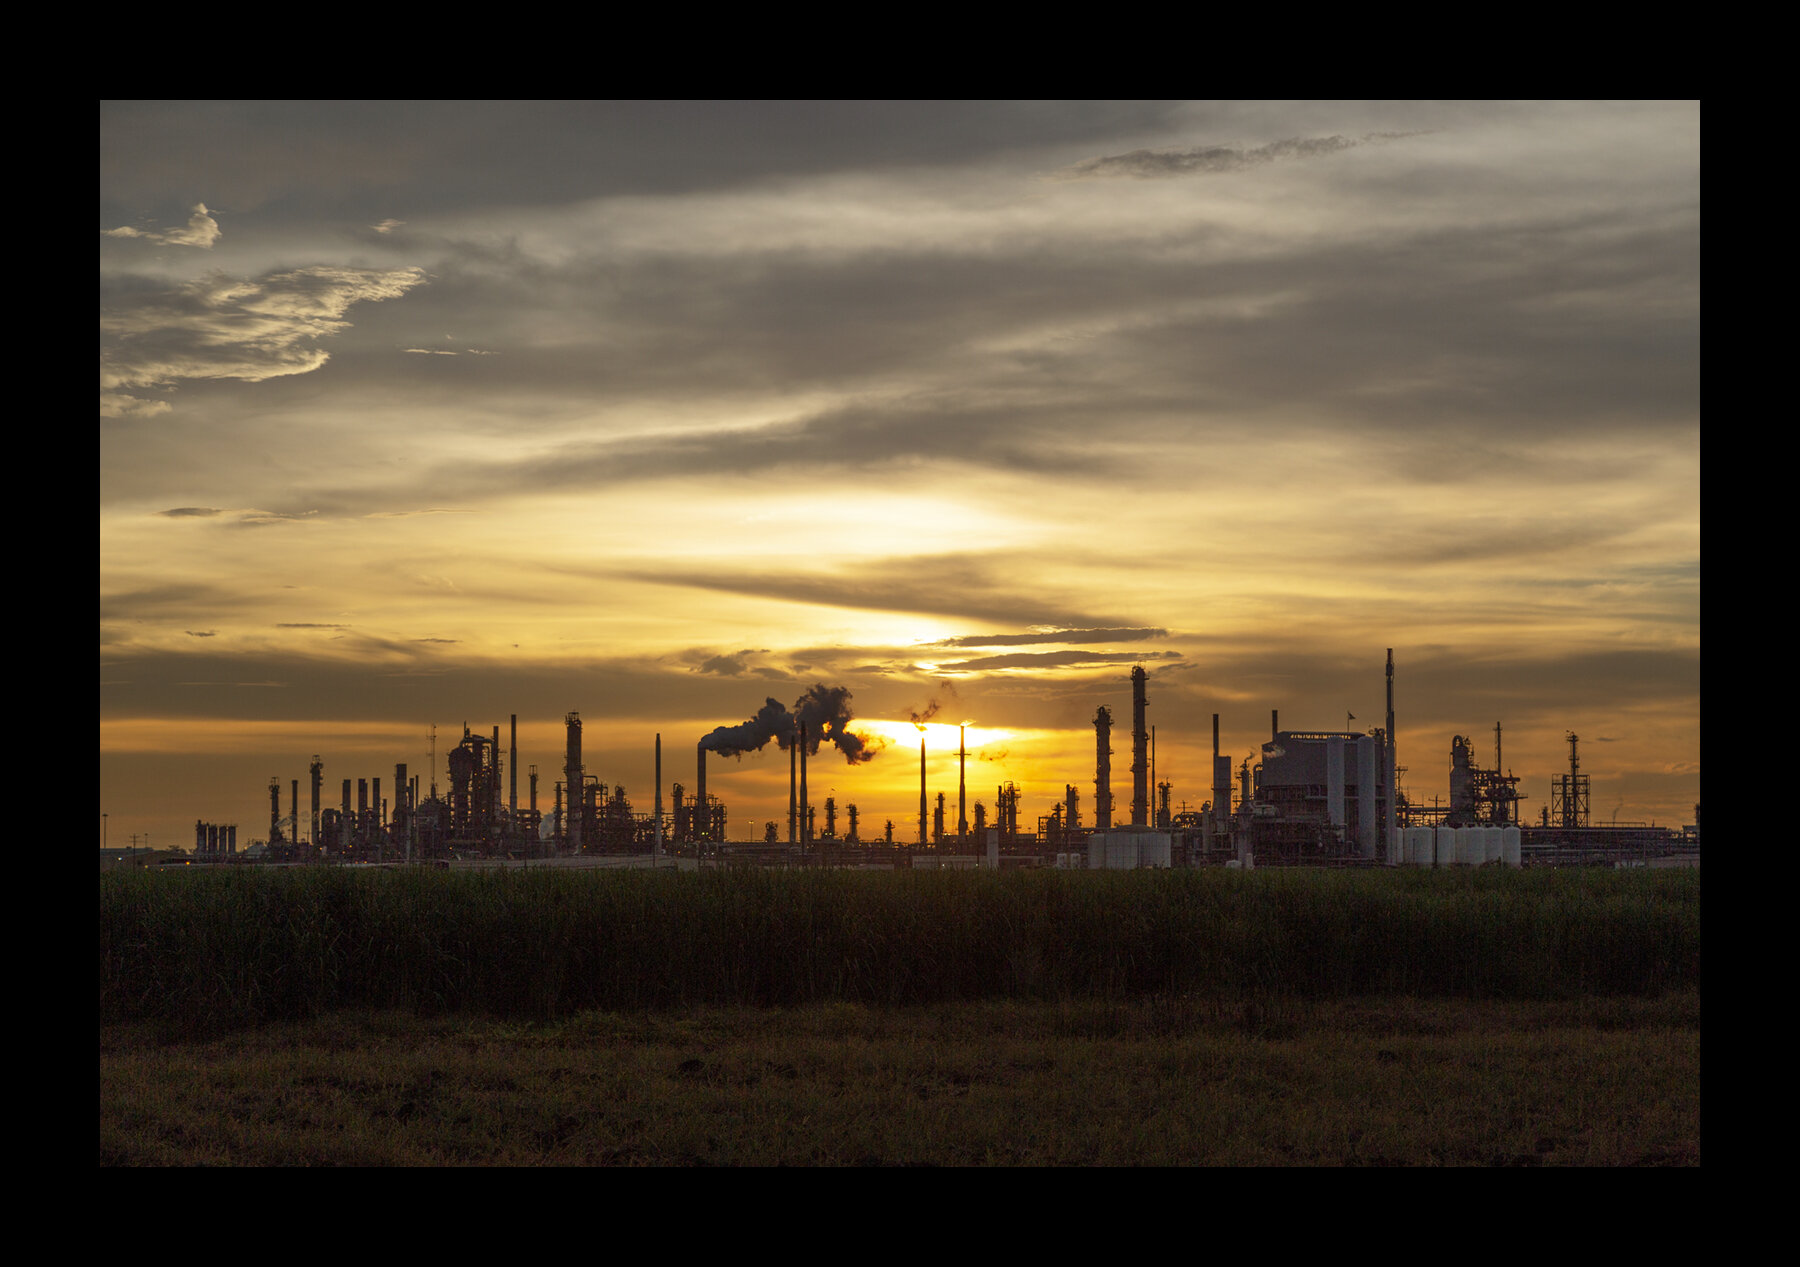  Petrochemical facilities along the Mississippi River in Louisiana, known as "cancer alley" or "death alley." Over 200 of these industrial facilities have polluted the local environment for decades. Cancer, asthma and other ailments are some of the h